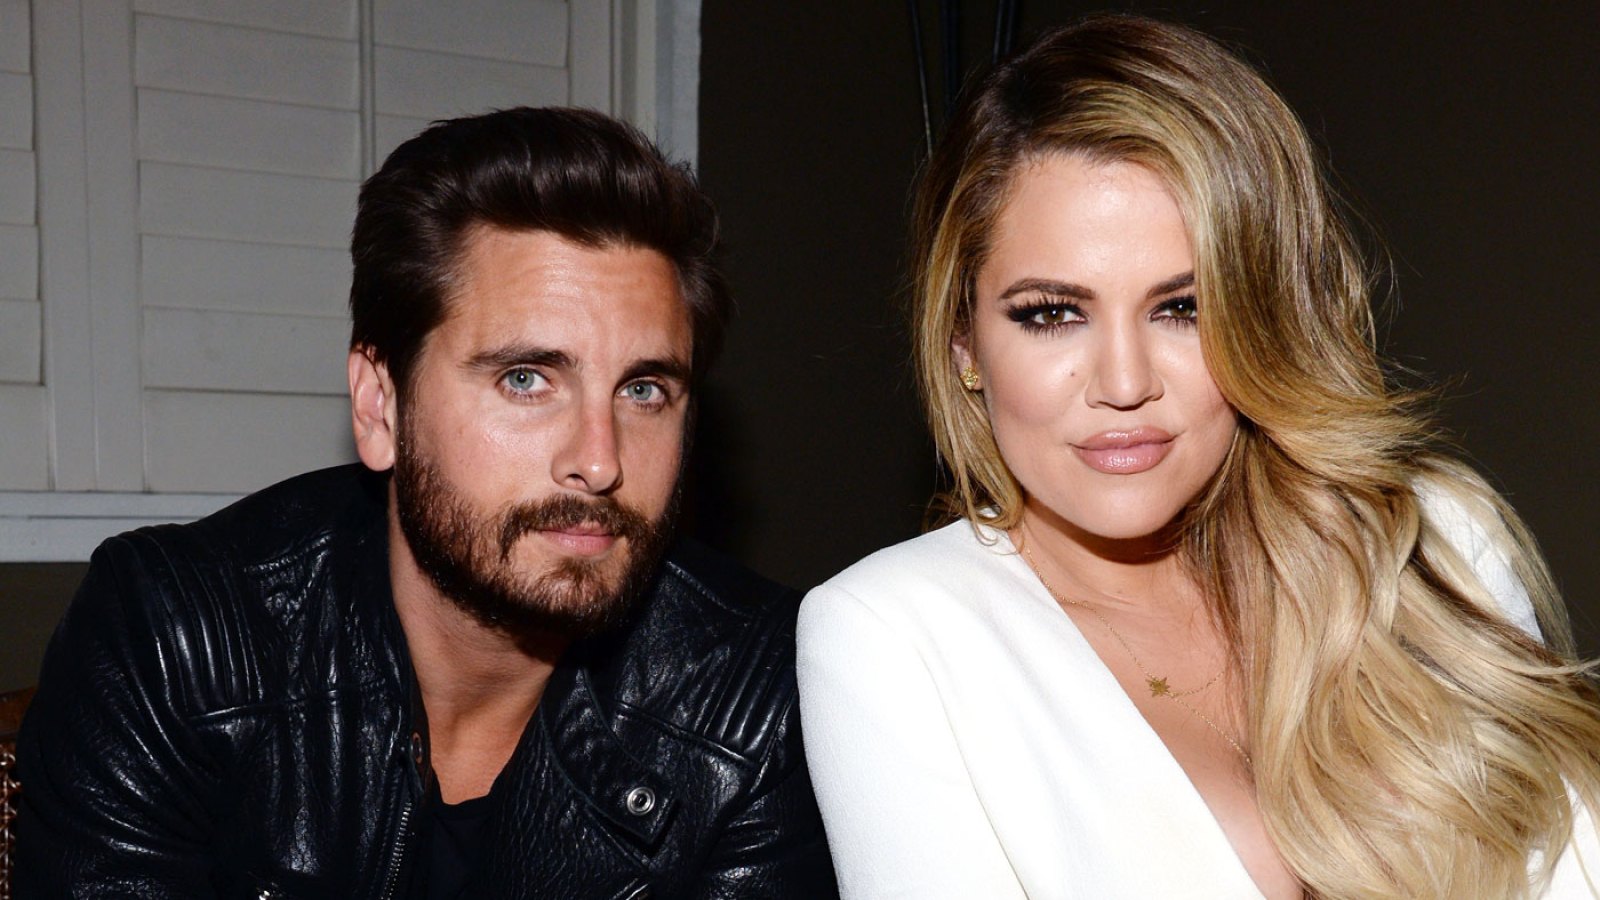 Scott Disick ‘Hates’ That Khloe Kardashian Has Been ‘Burned by Men’ Over the Years Calvin Klein Jeans Leather Jacket White Dress